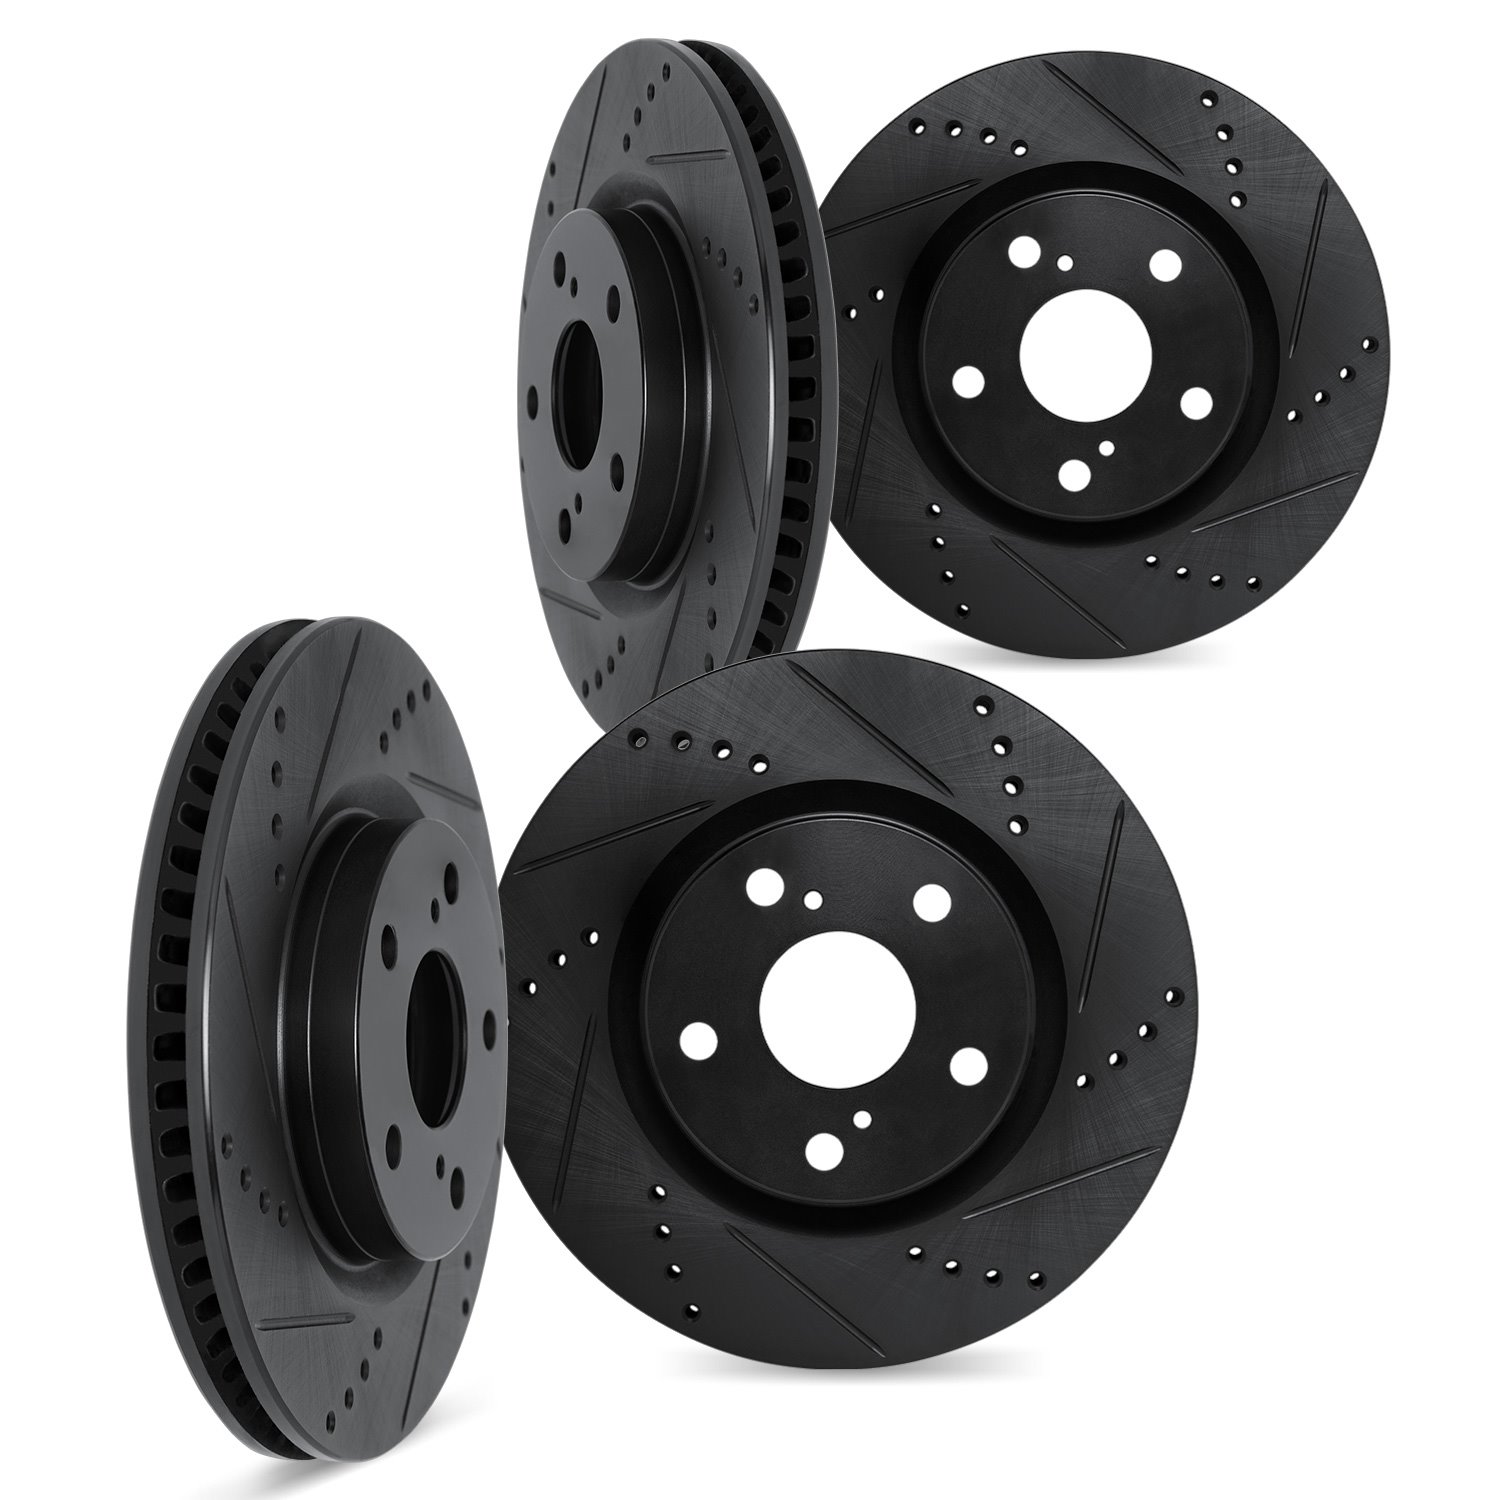 8004-31025 Drilled/Slotted Brake Rotors [Black], 2007-2013 BMW, Position: Front and Rear